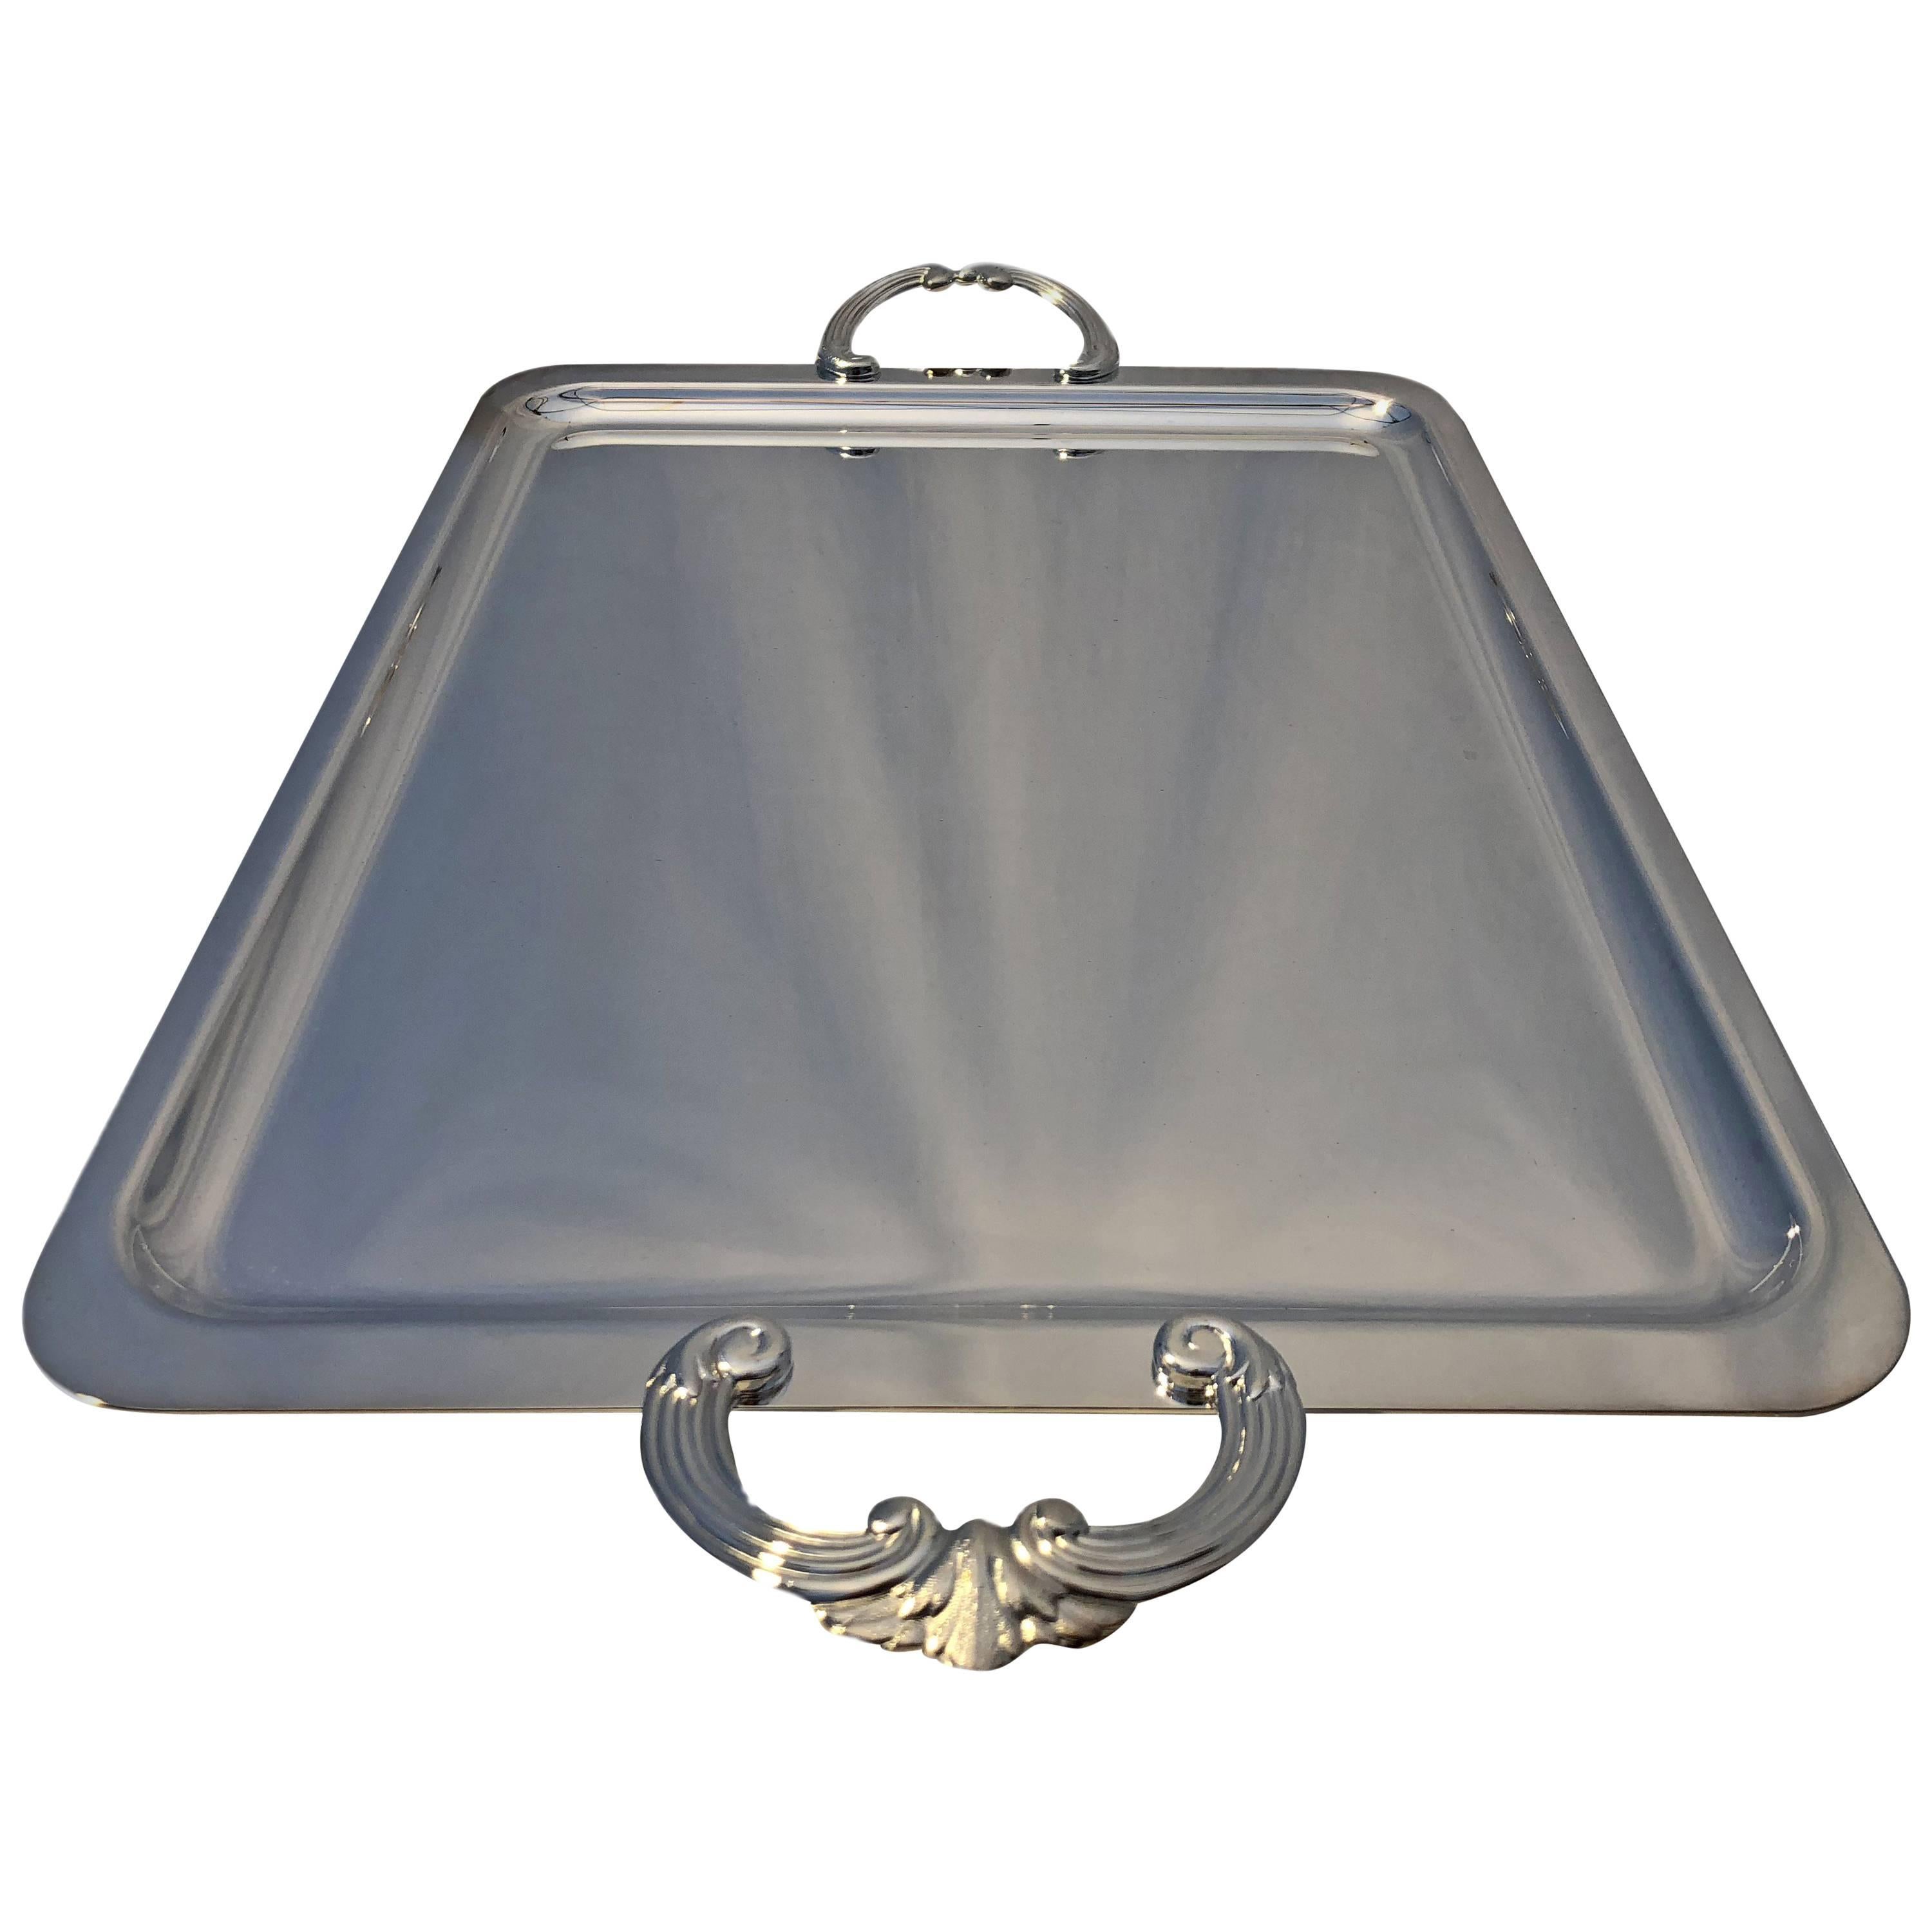 Christofle Silver Plated Rectangular Tray Carnavalet For Sale